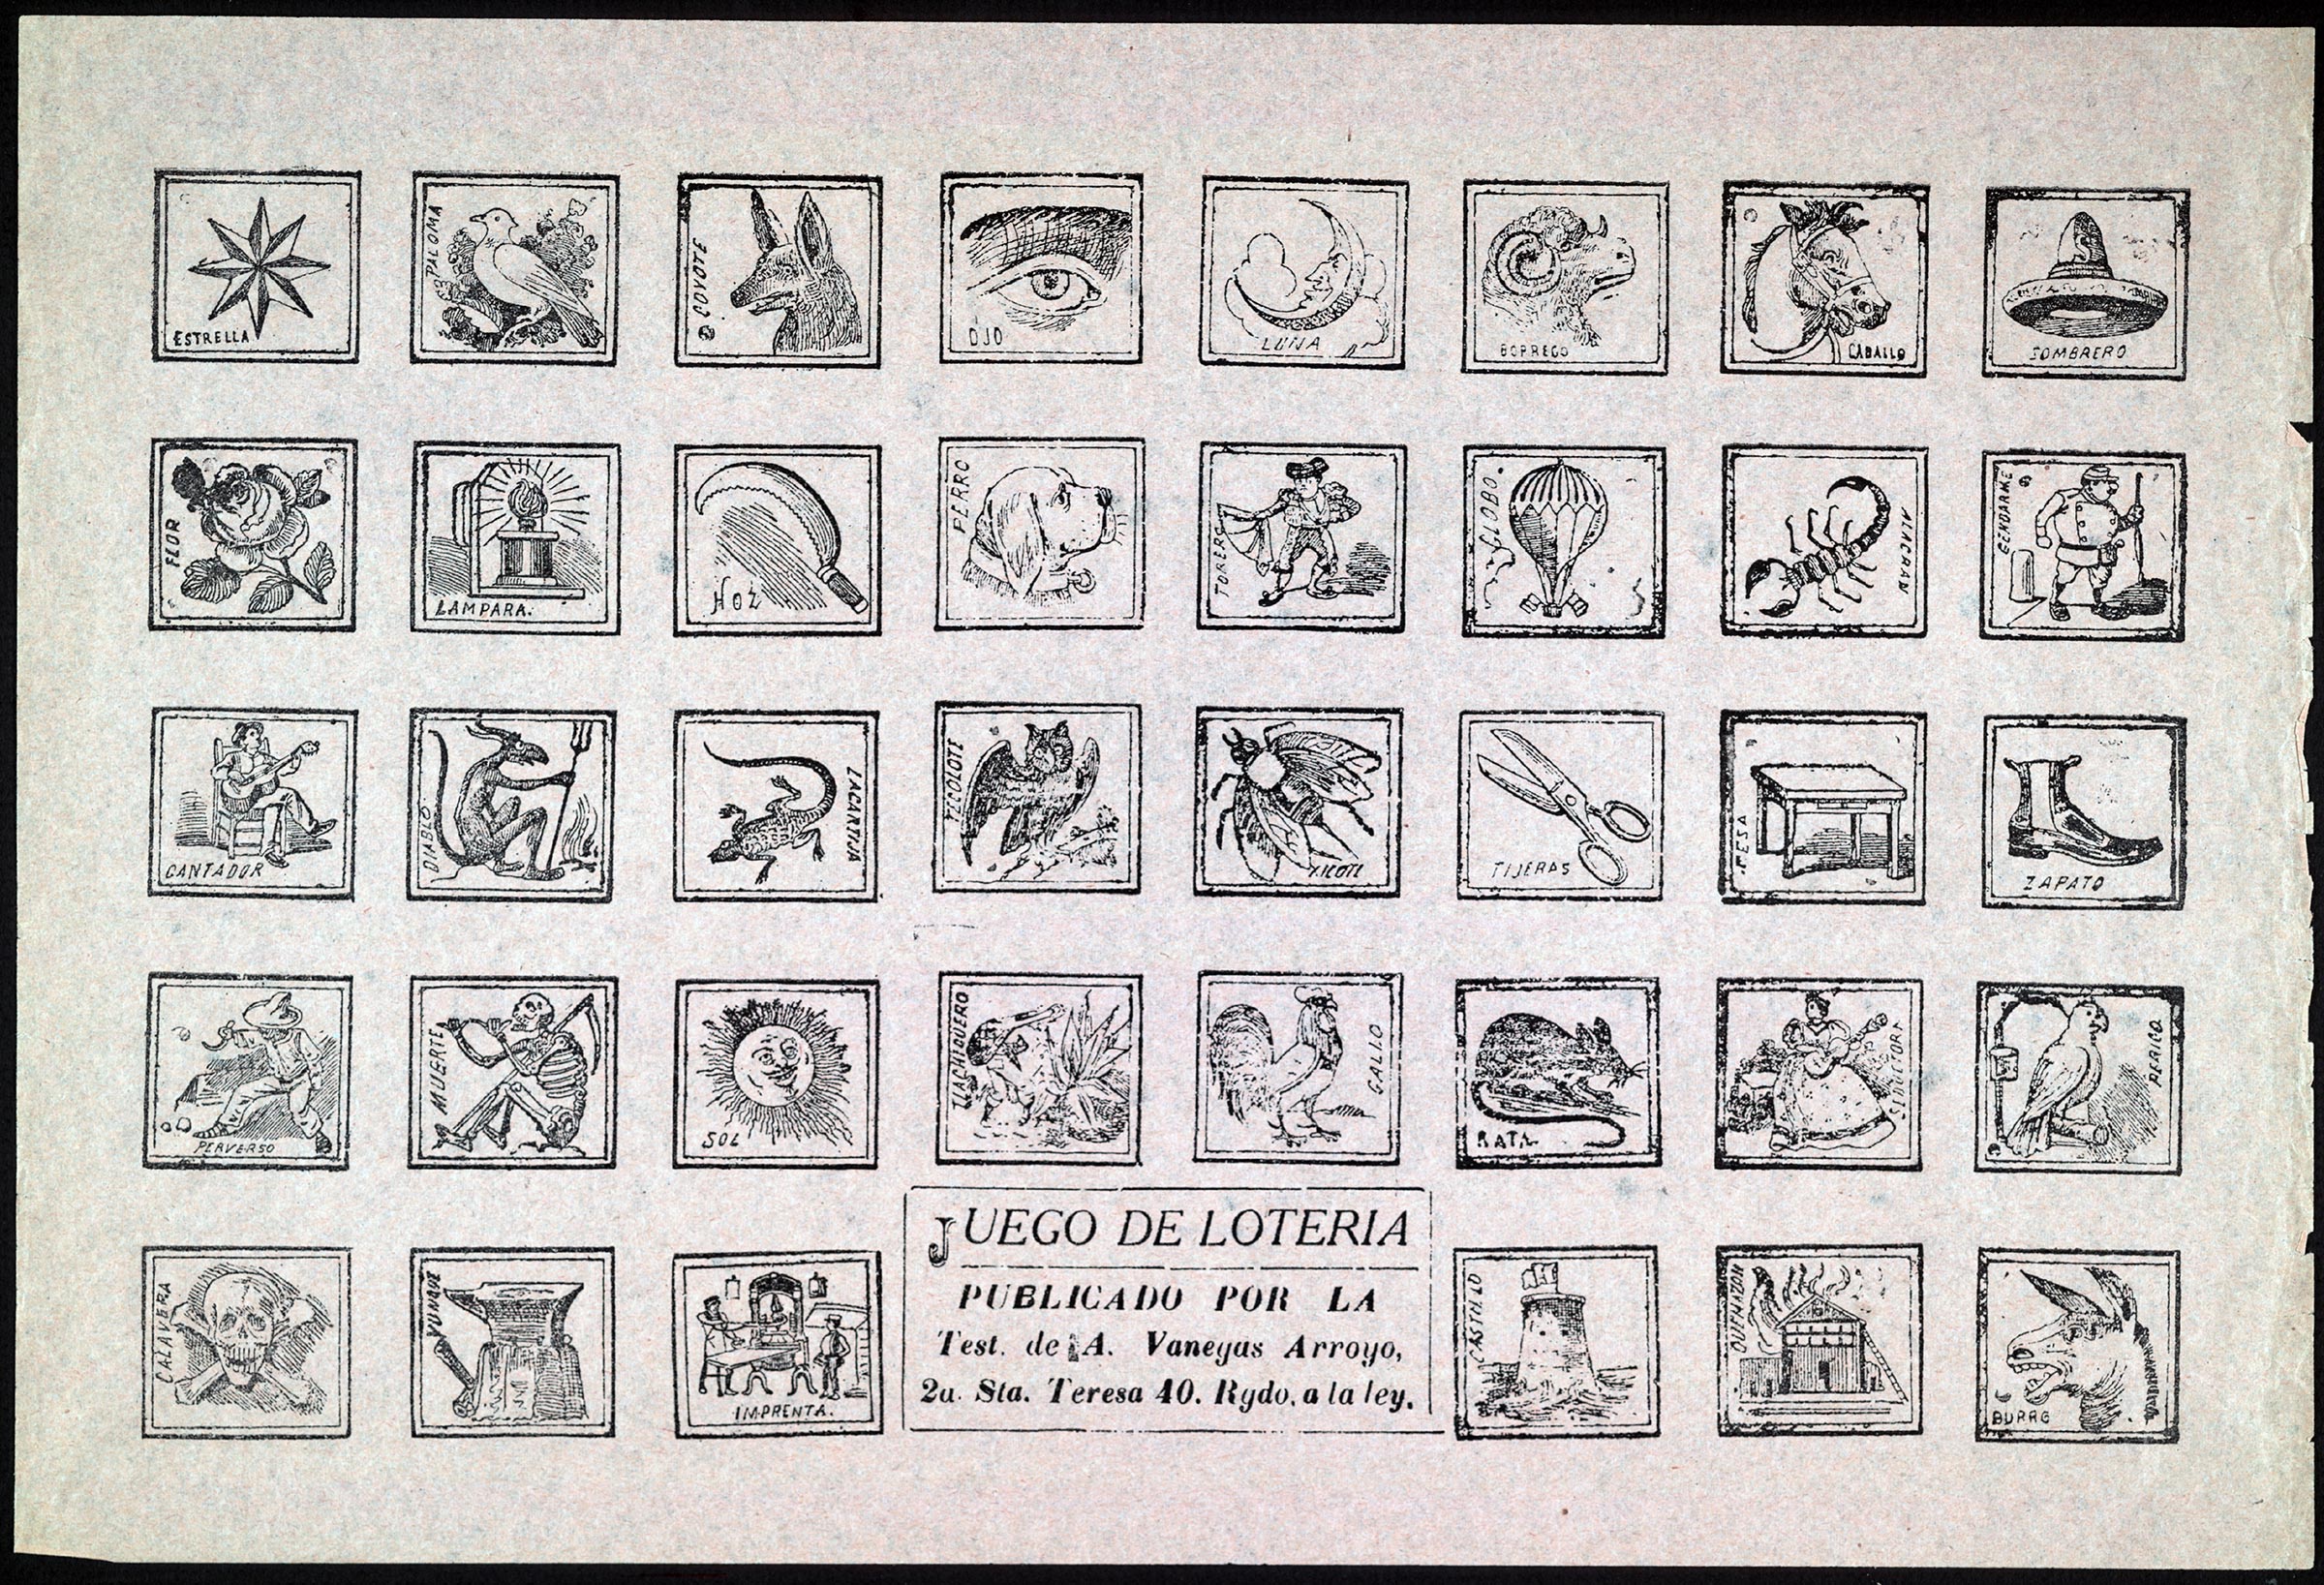 Lotería game by José Guadalupe Posada, published in Mexico City between 1909 and 1920.